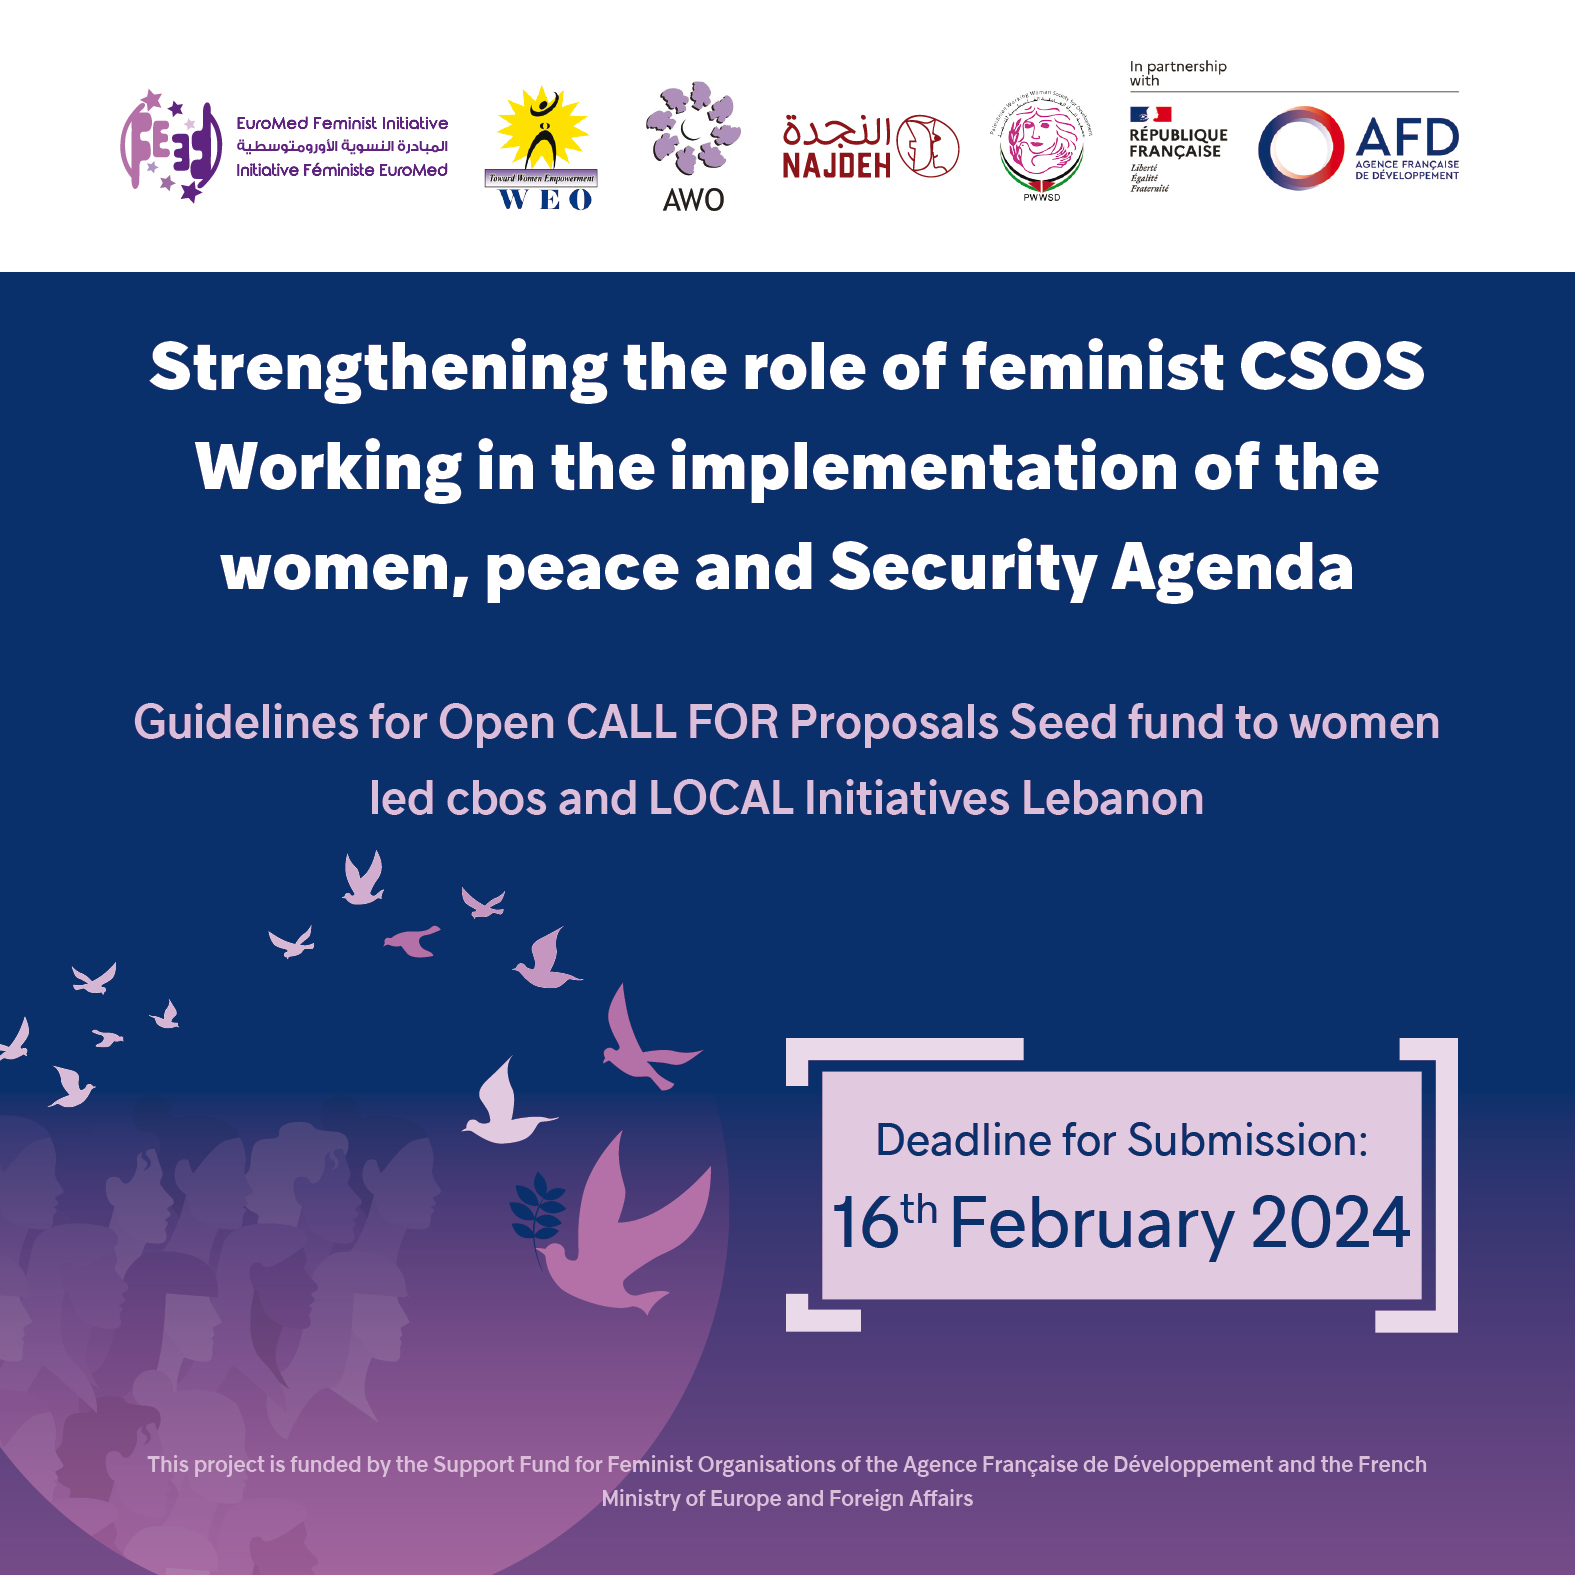 Strengthening the role of feminist CSOS Working in the implementation of the women, peace and Security Agenda (WPSA)